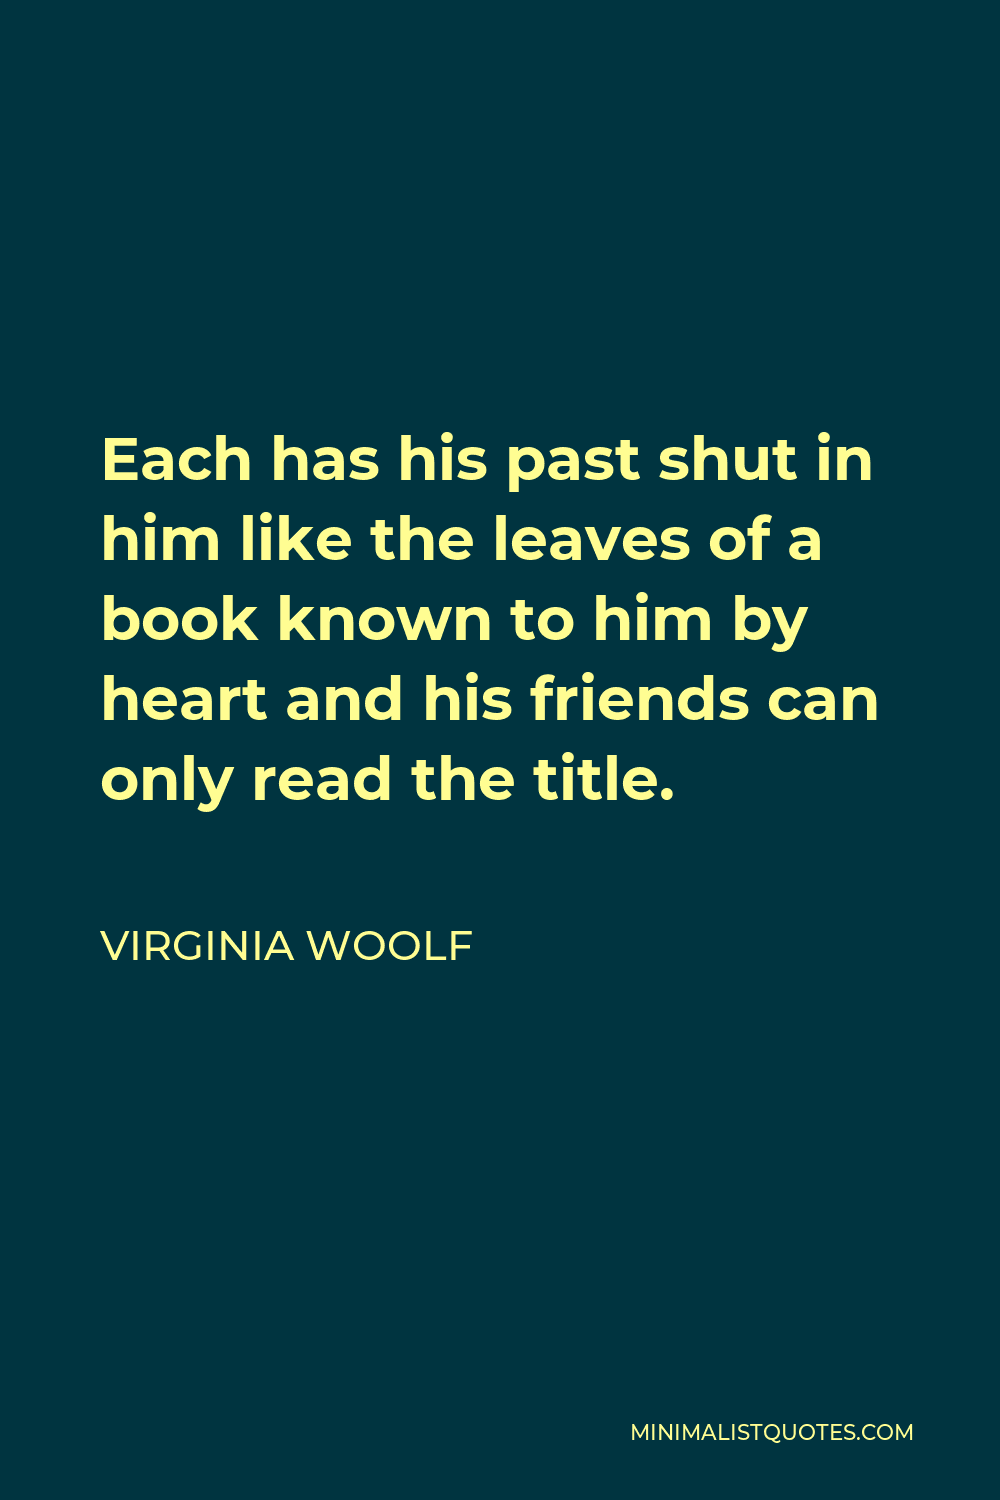 Virginia Woolf Quote - Each has his past shut in him like the leaves of a book known to him by heart and his friends can only read the title.